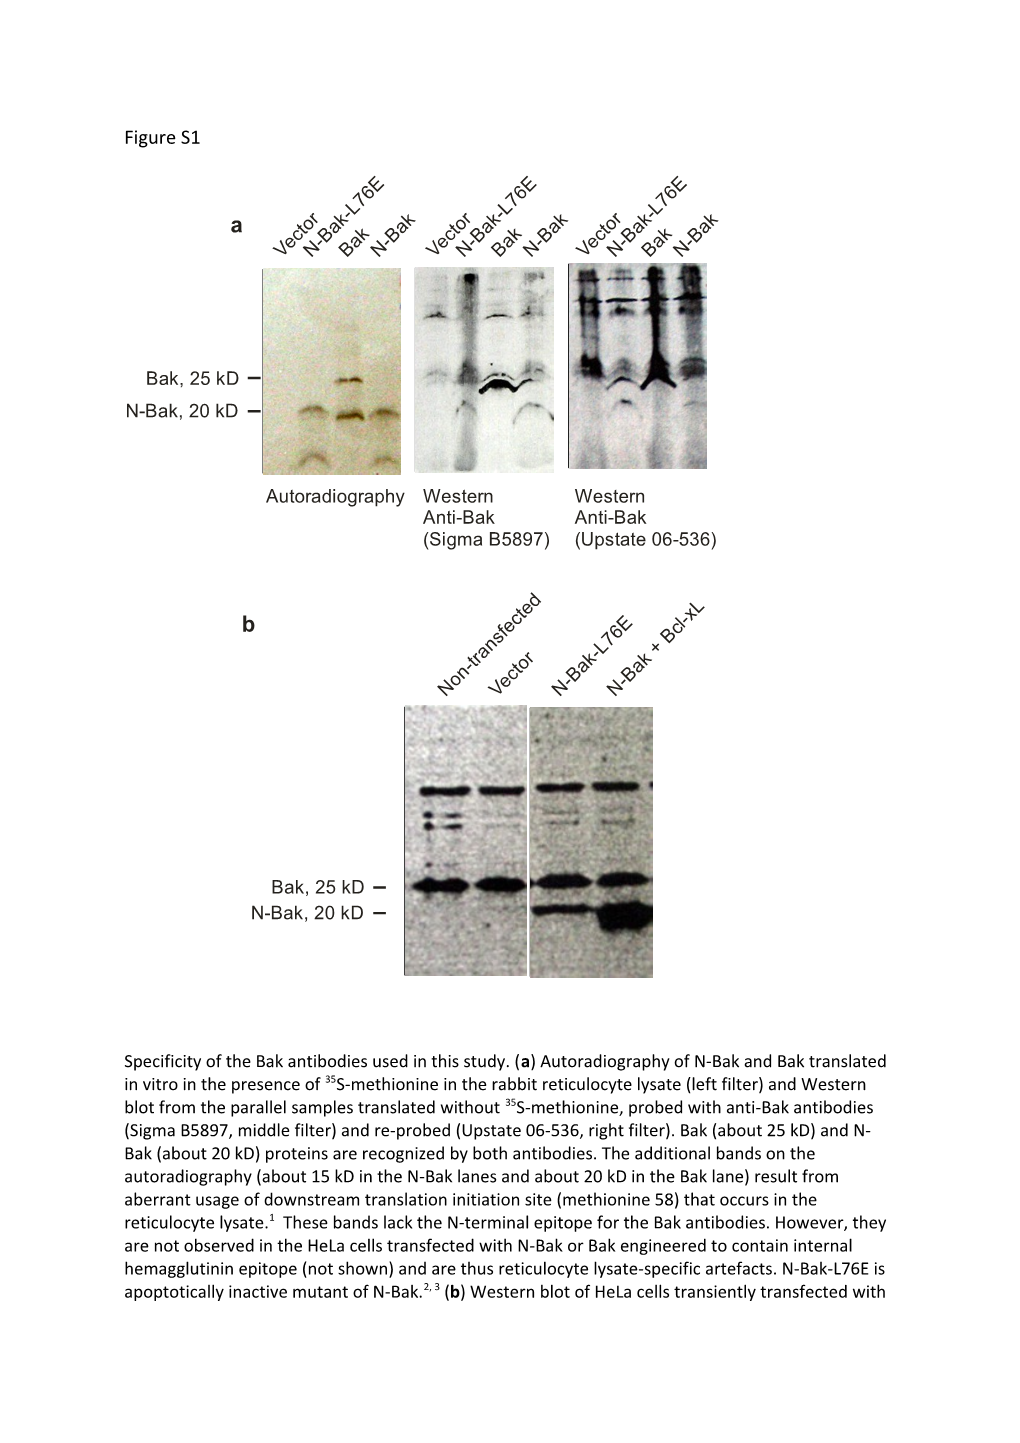 Specificity of the Bak Antibodies Used in This Study. (A) Autoradiography of N-Bak And